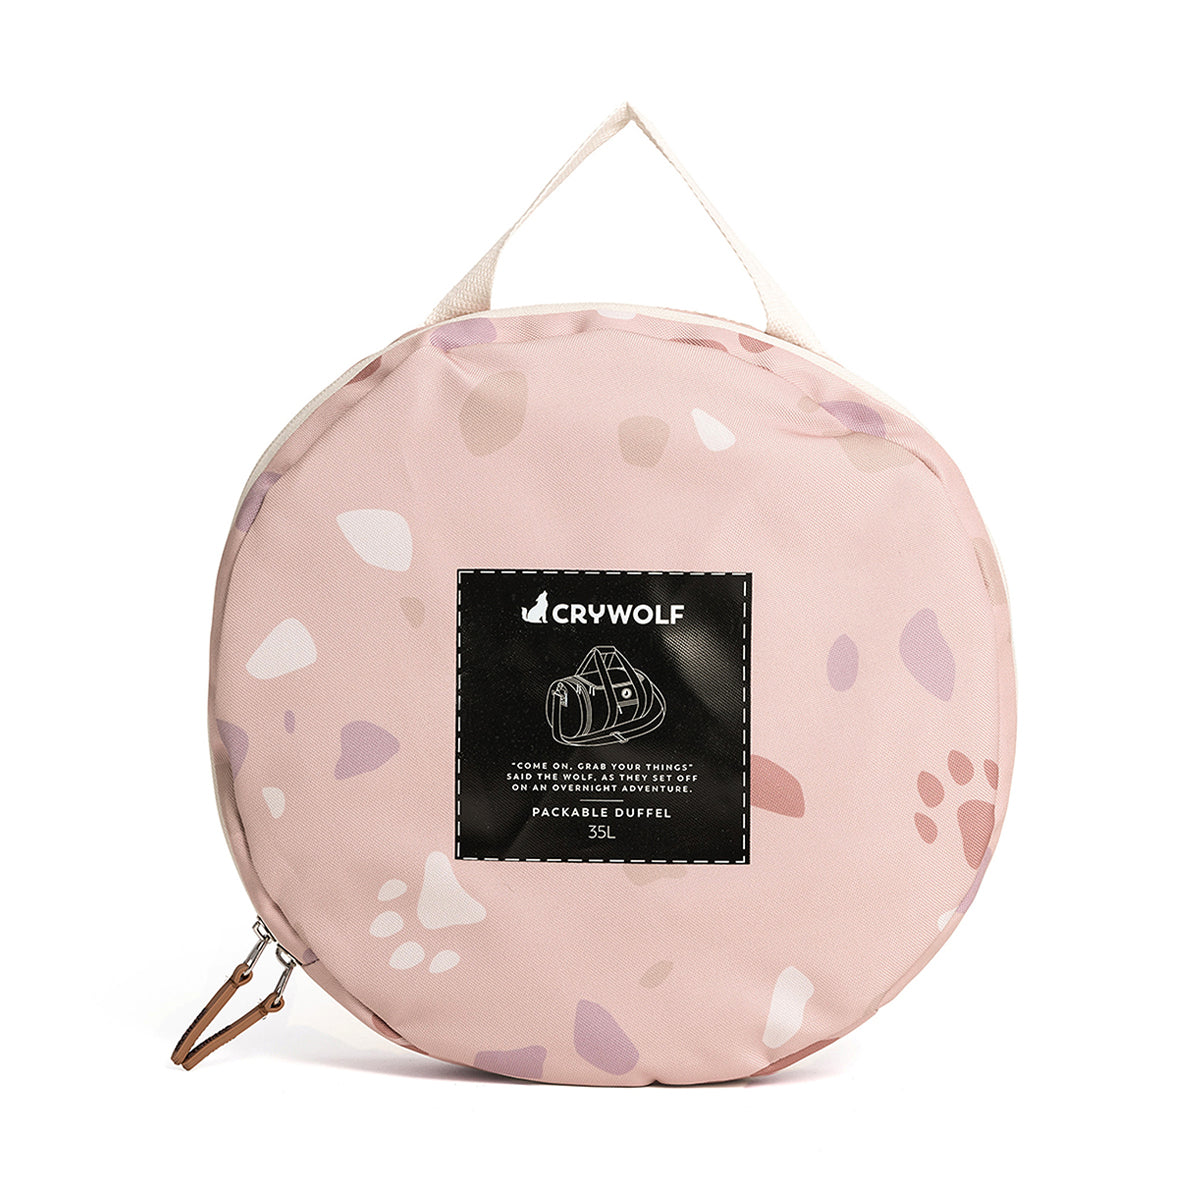 Crywolf Packable Duffel - Blush Stones